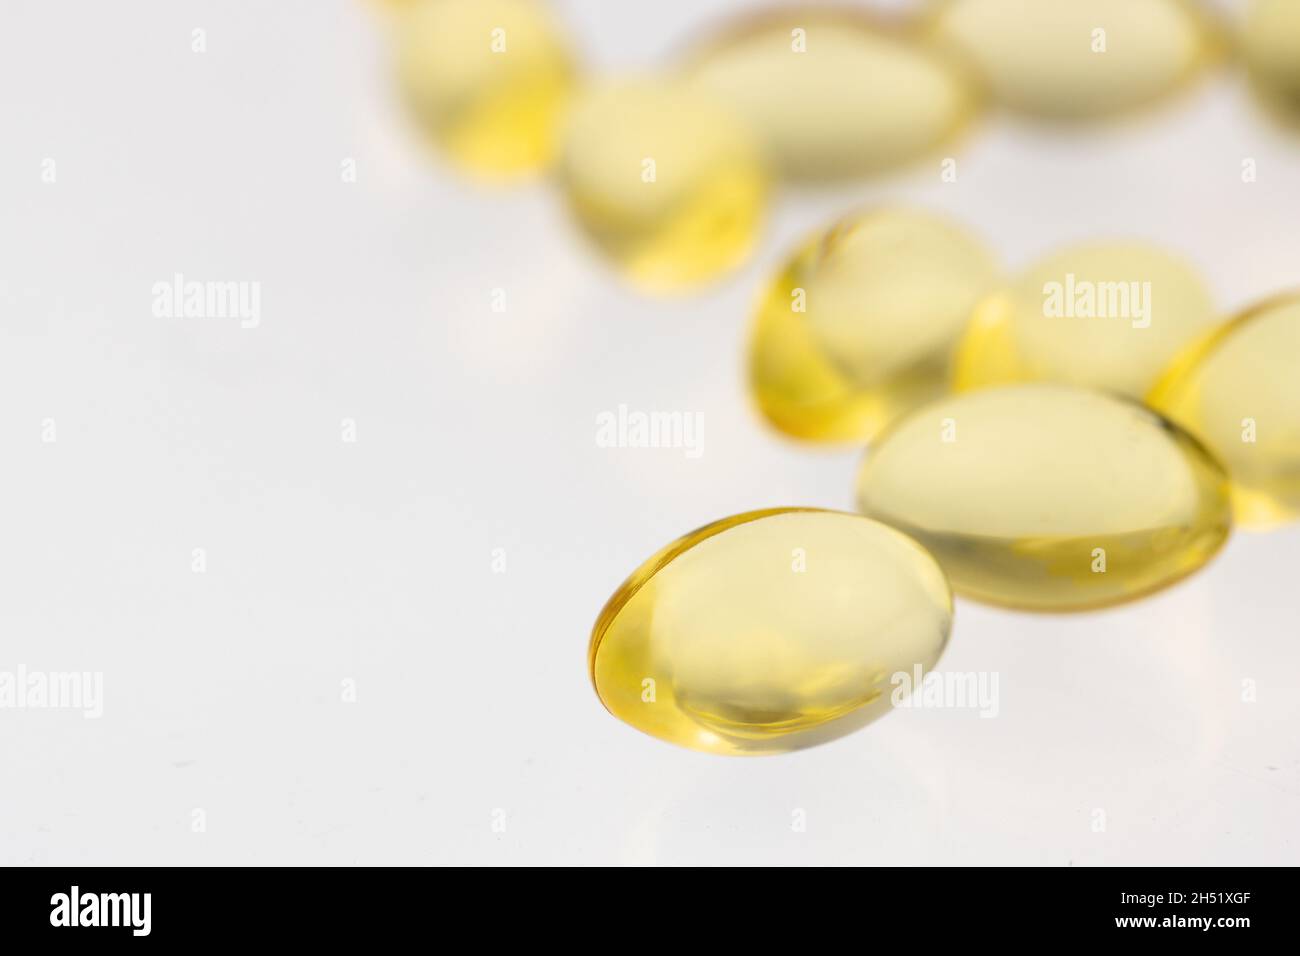 grouping of multiple gel tabs of fish oil, vitamin D or E supplements on a soft white background with shallow depth of field and copy space Stock Photo